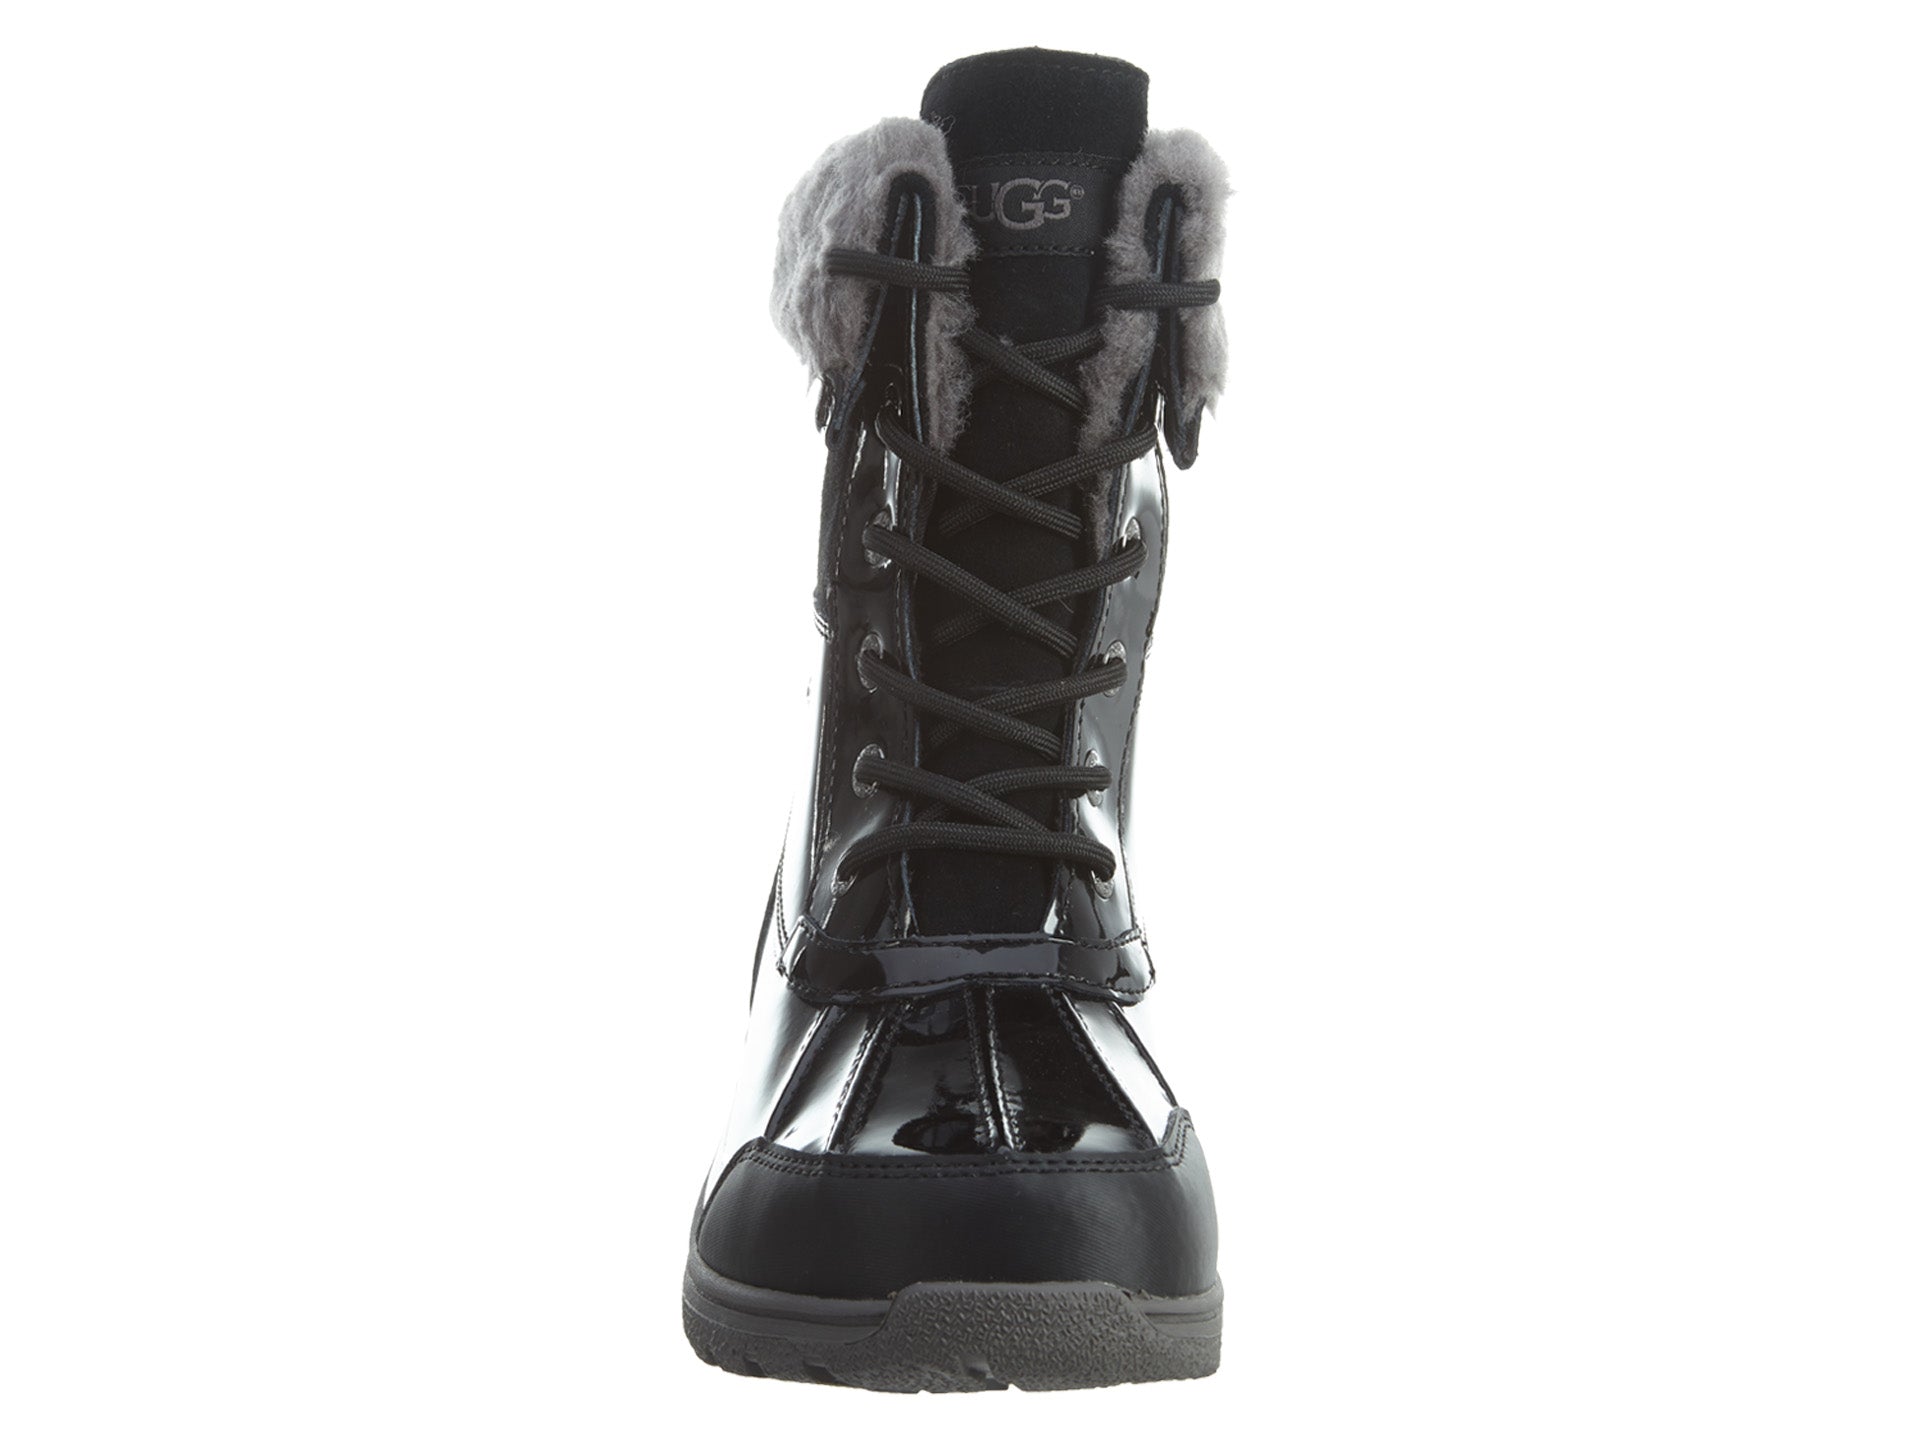 Uggs Butte Ii Patent Big Kids Style : 1014396y